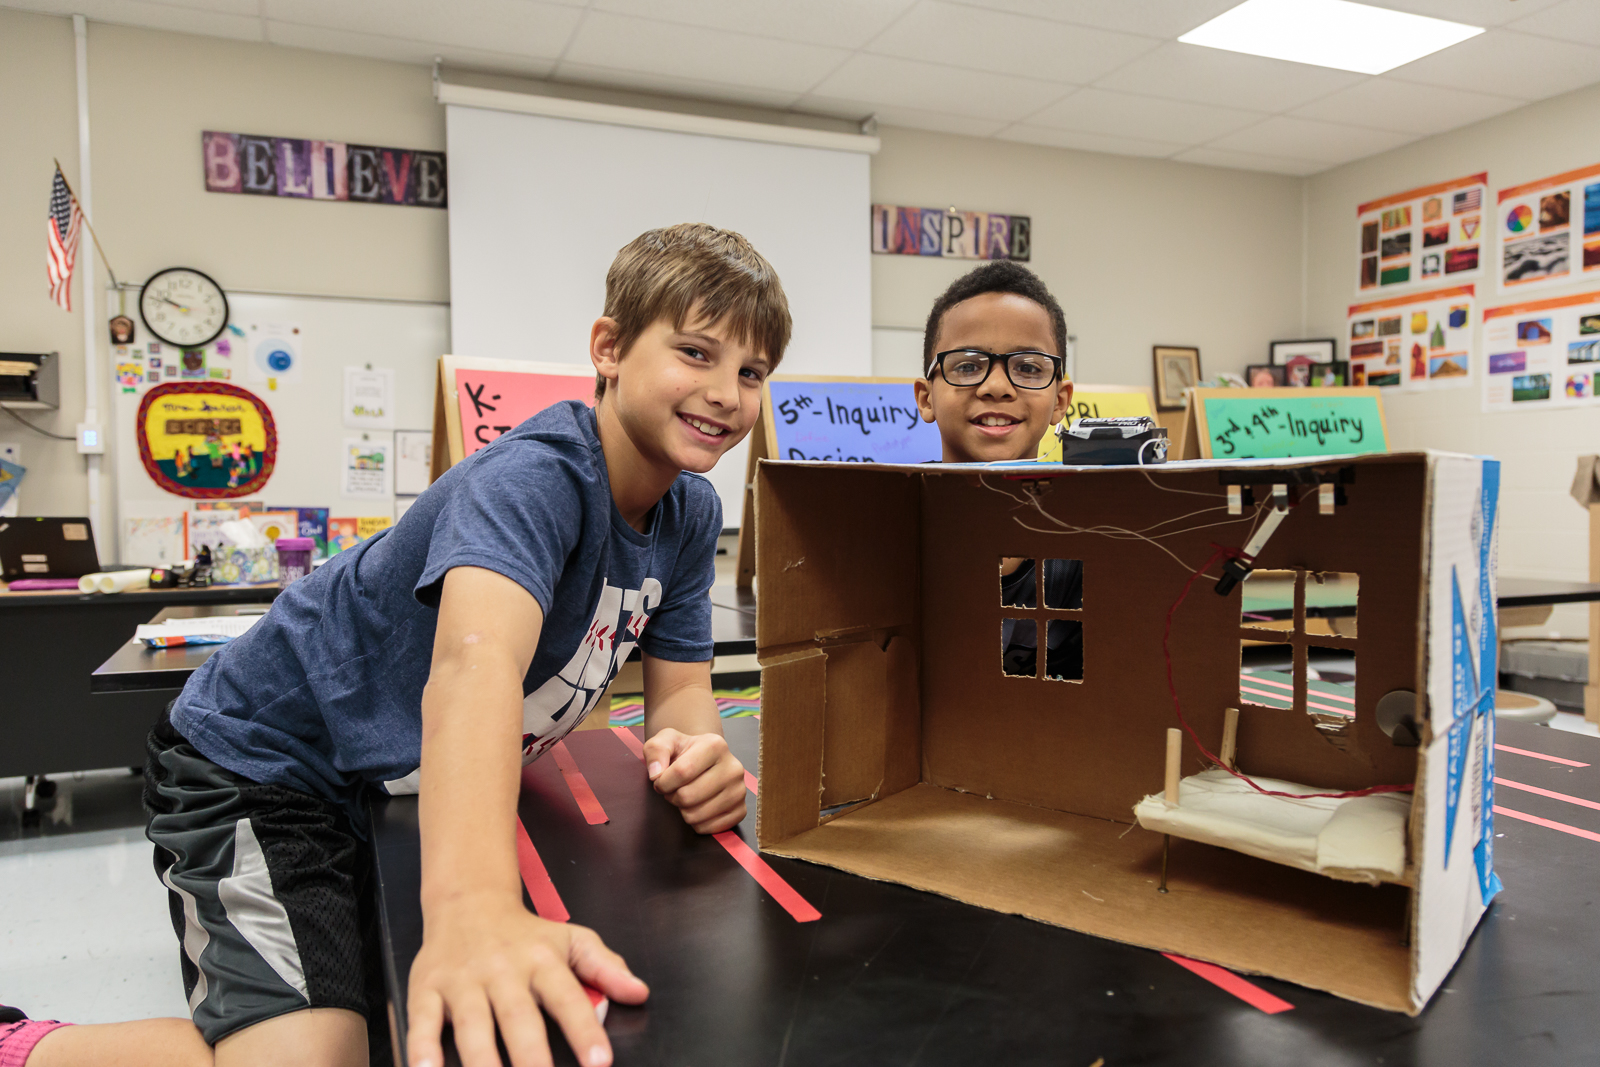   Future electrical engineer  Noah  (right) and partner  Chase , both 4th graders, designed “The Rever,” a lever to turn off the lights from the comfort of bed. “We don’t like getting out of bed [once comfortable]… to turn off the light. And then you